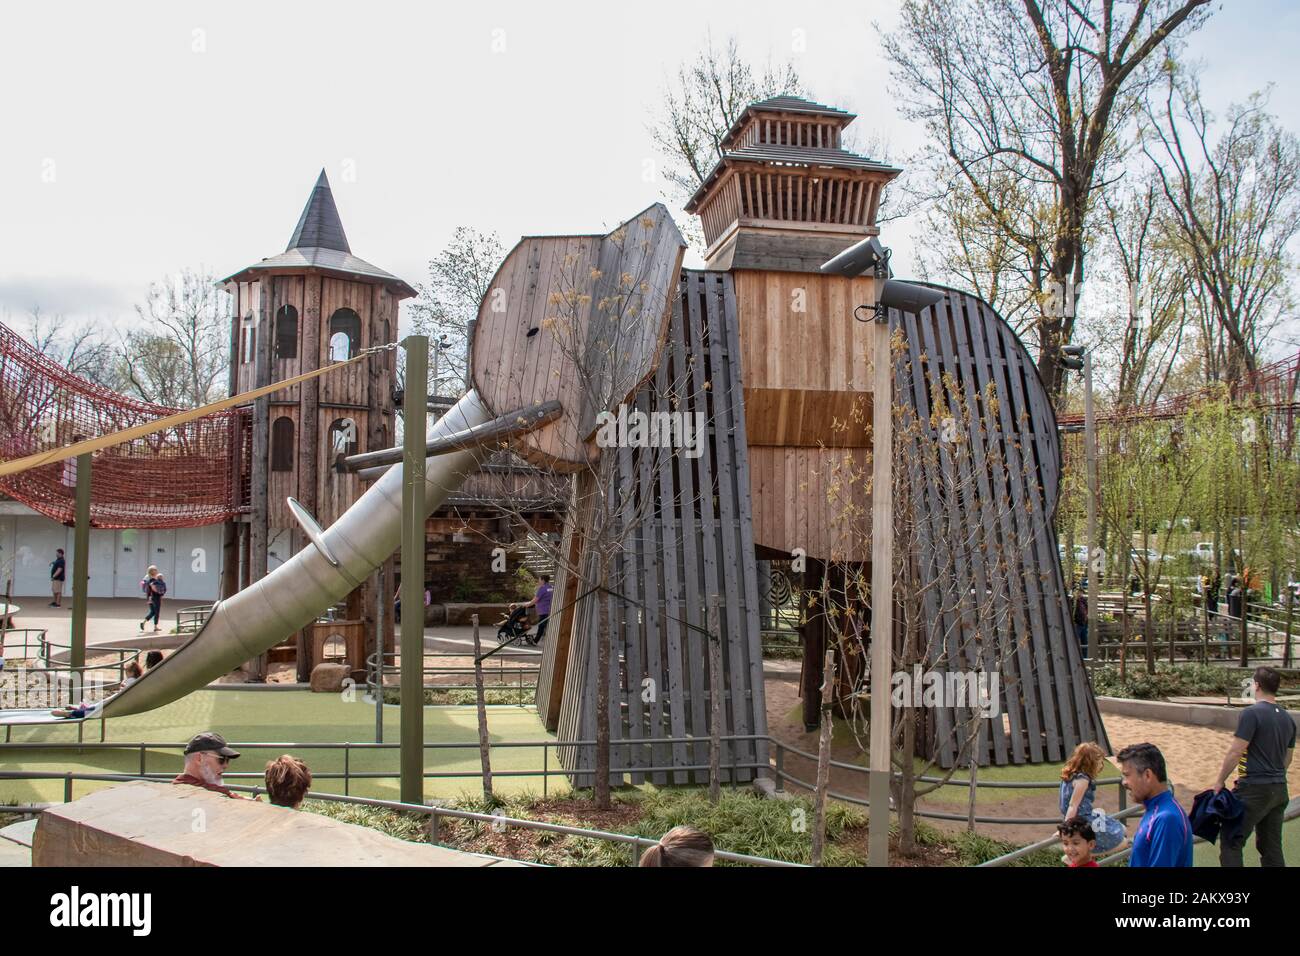 4 6 18 Tulsa Usa Unique Wooden Childrens Slide Built To Look Like Huge Elephant In Gathering Place Public Park With Children And Adults Gathered Aro Stock Photo Alamy